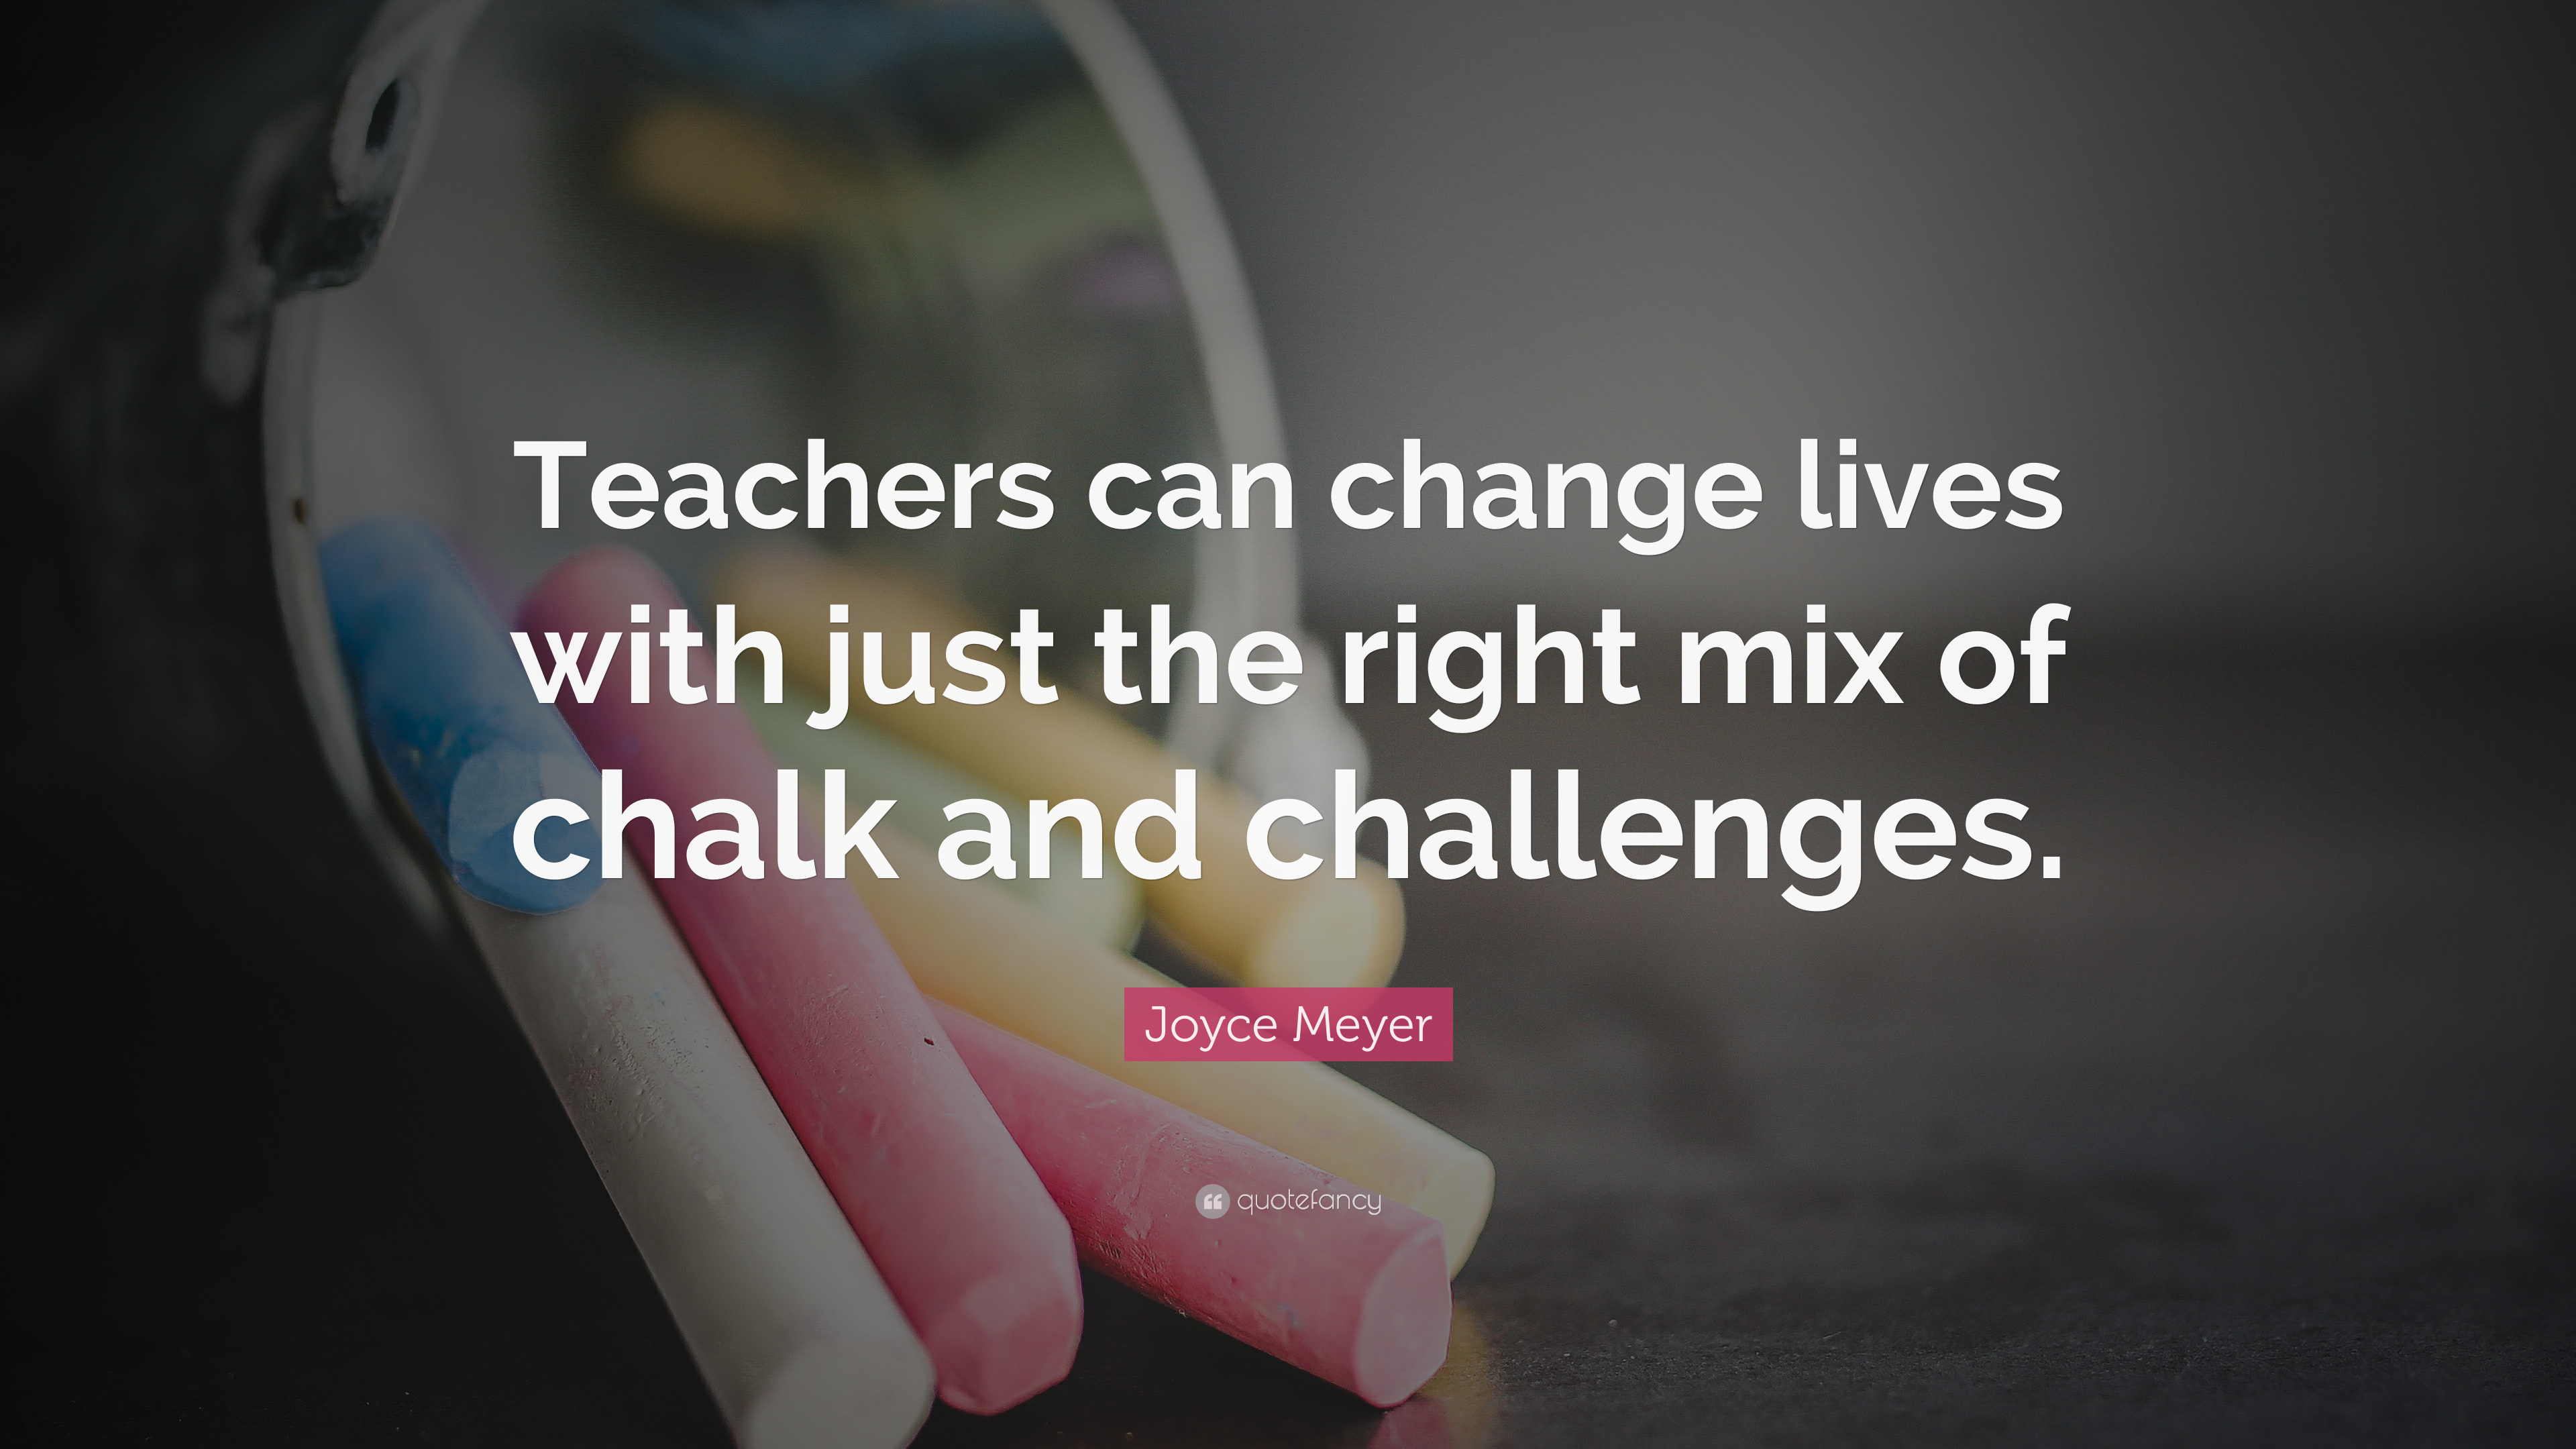 Joyce Meyer Quote: “Teachers can change lives with just the right